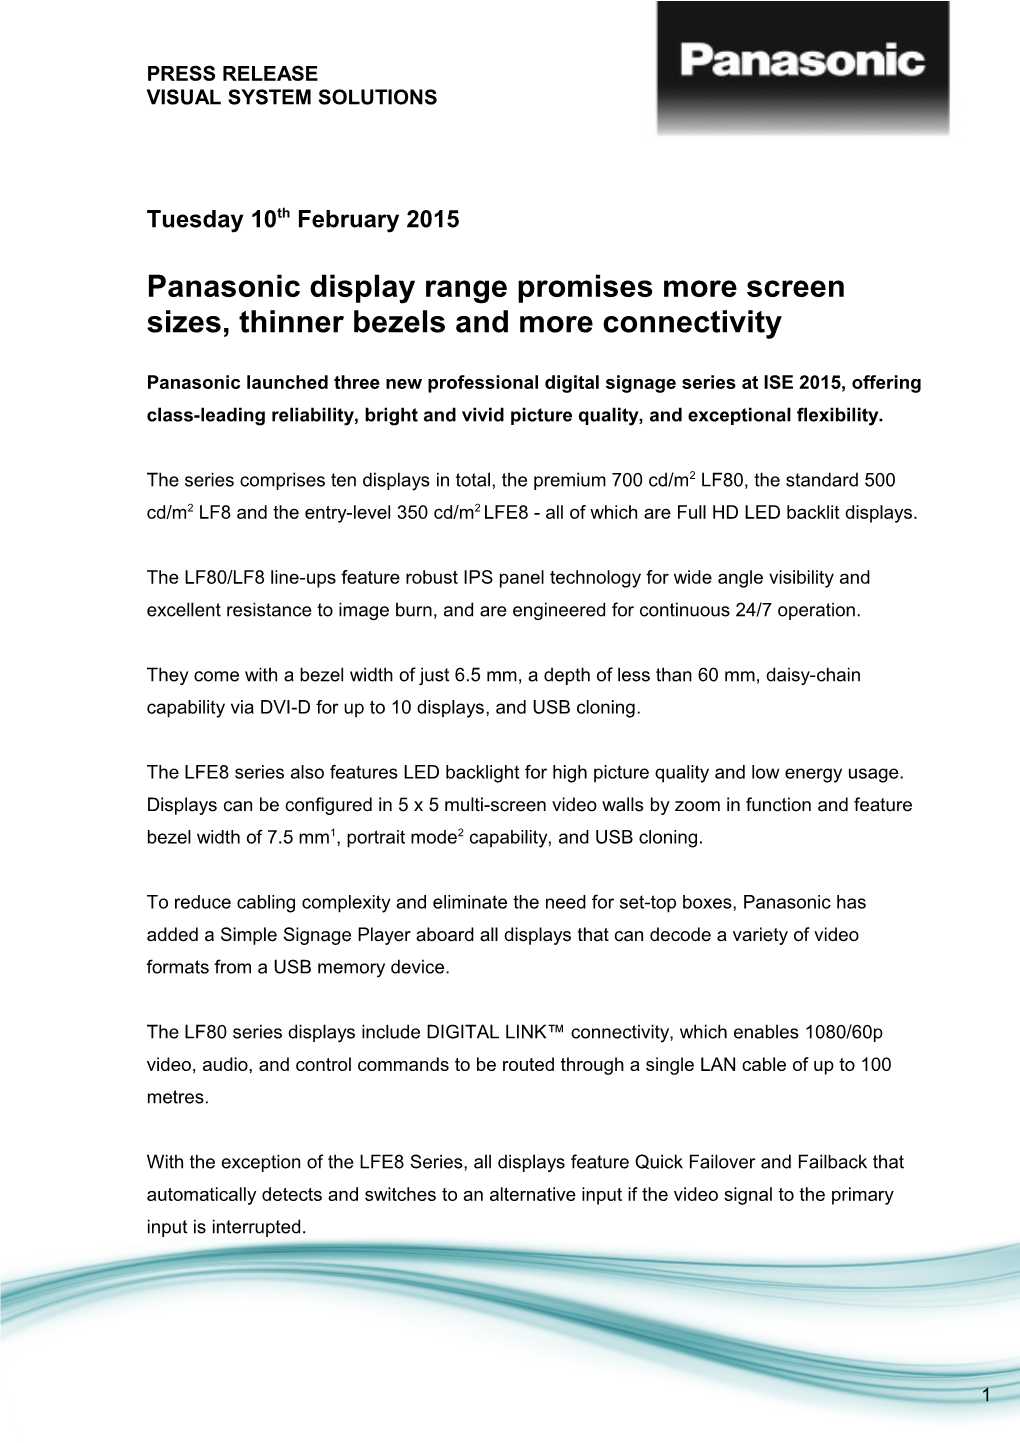 Panasonic Display Range Promises More Screen Sizes, Thinner Bezels and More Connectivity